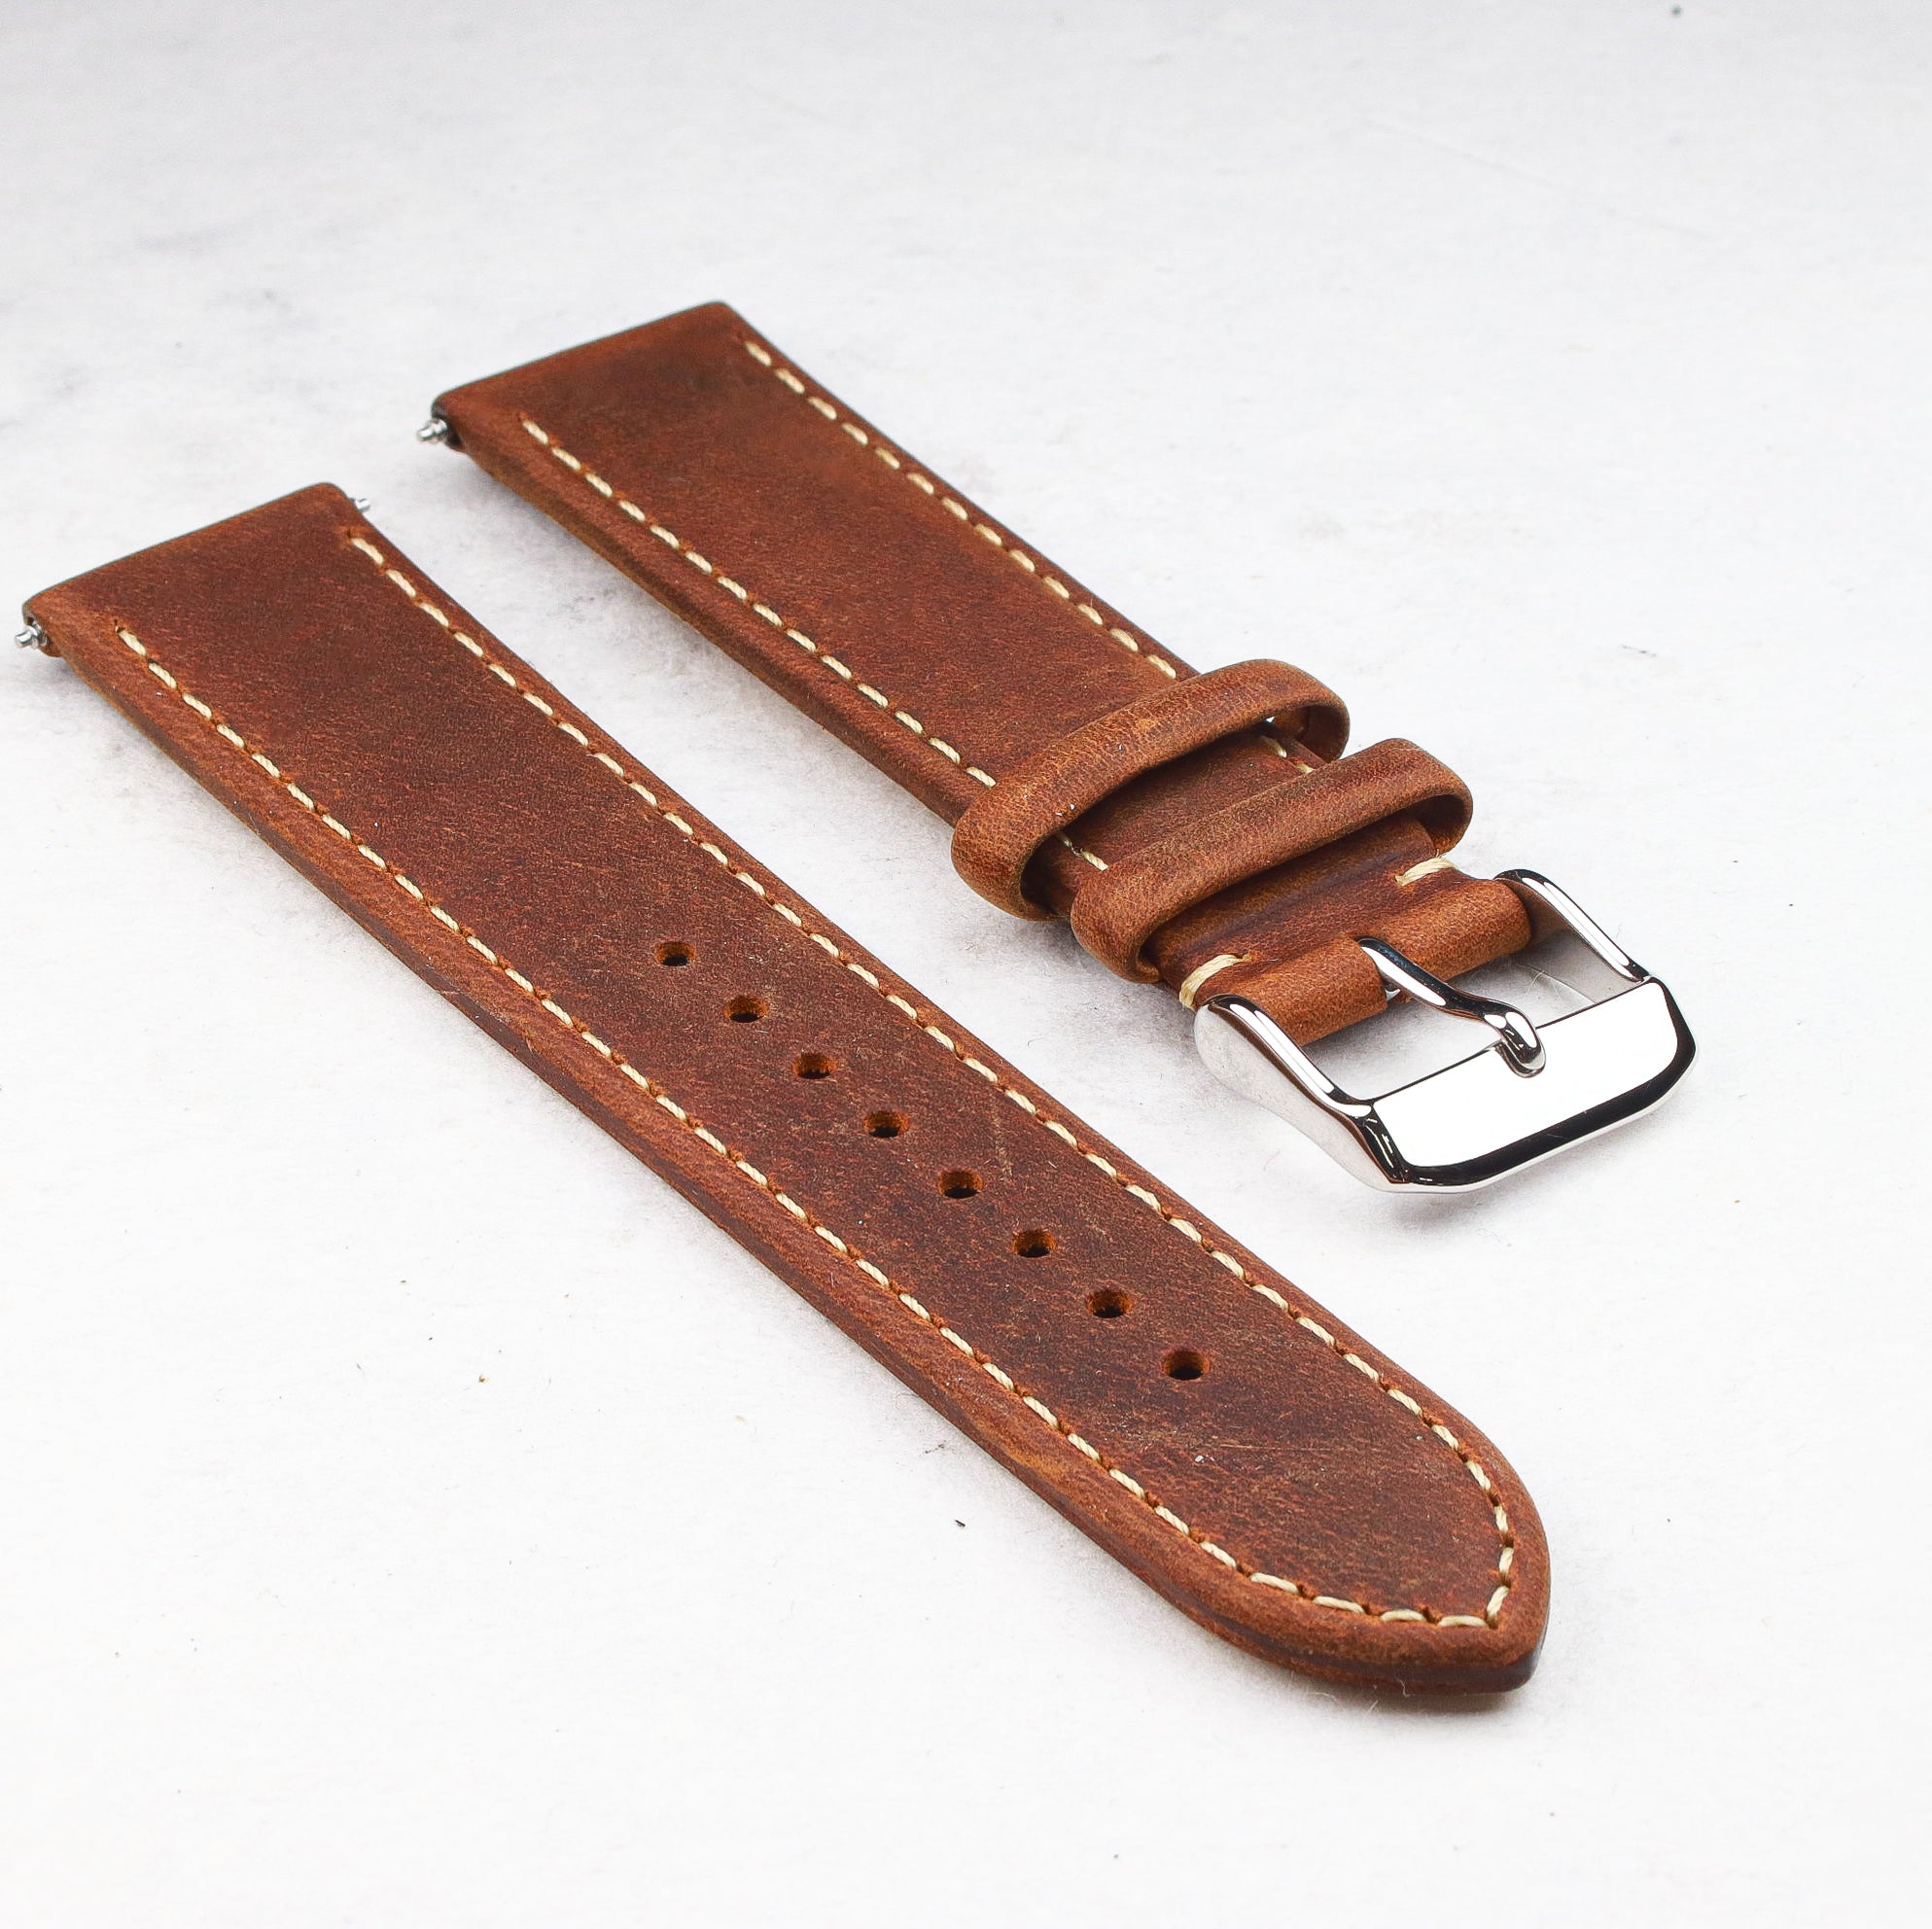 Suade Leather Strap - Wancher Watch Wancher Watch Brown Wancher Watch Suade Leather Strap {{ Automatic Watch {{ Watch }} }} {{ Japan }} Genuine Leather Strap with Silver Pin Closure by Wancher